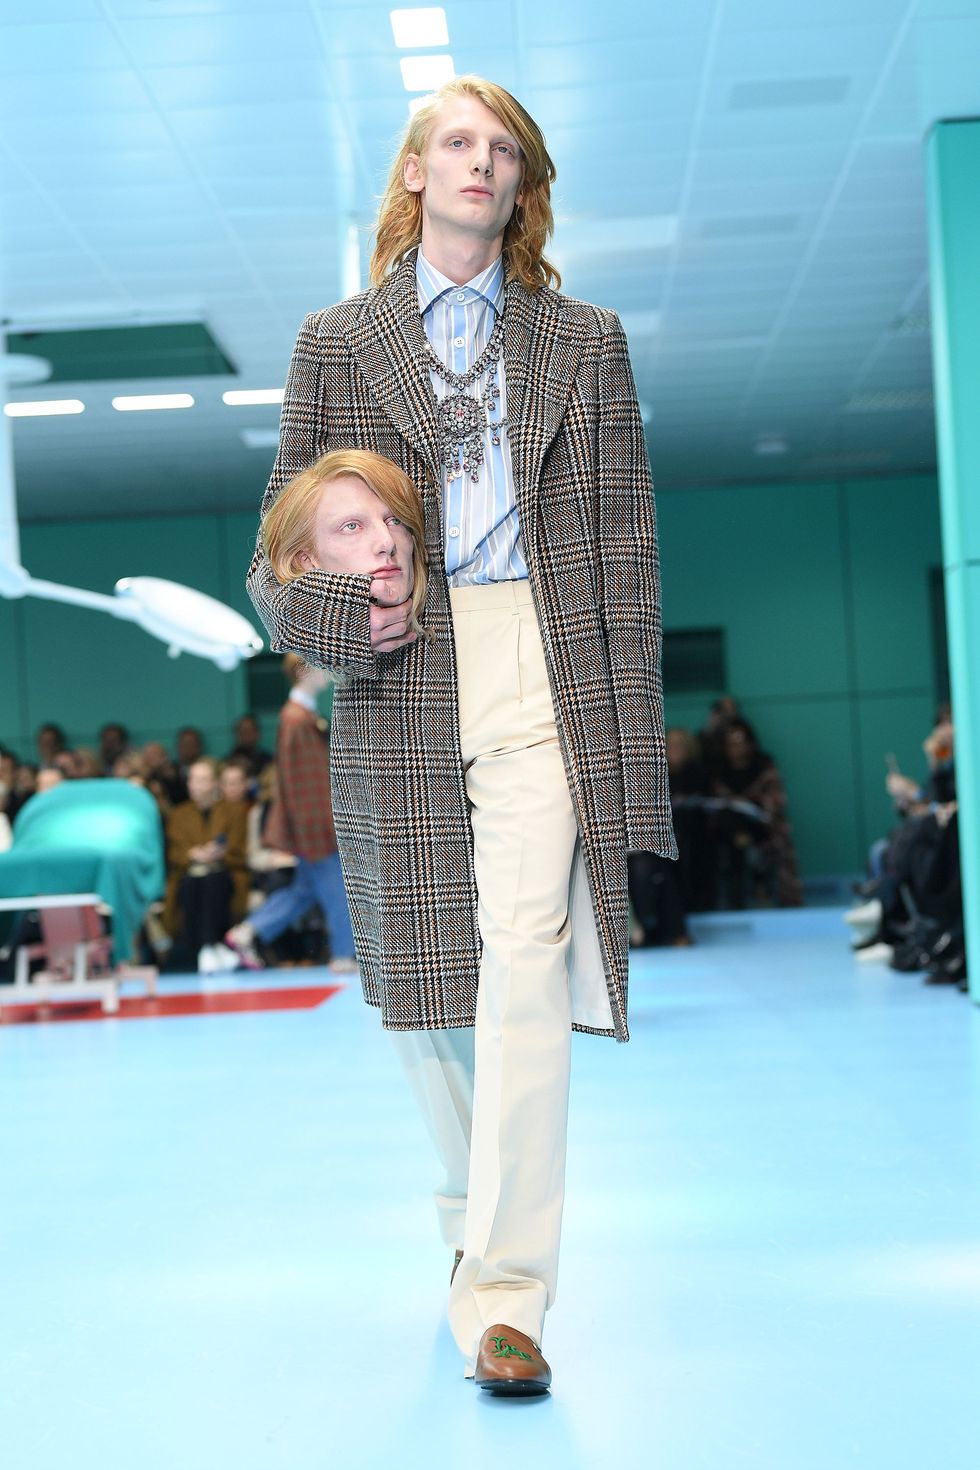 Gucci show features models carrying severed heads